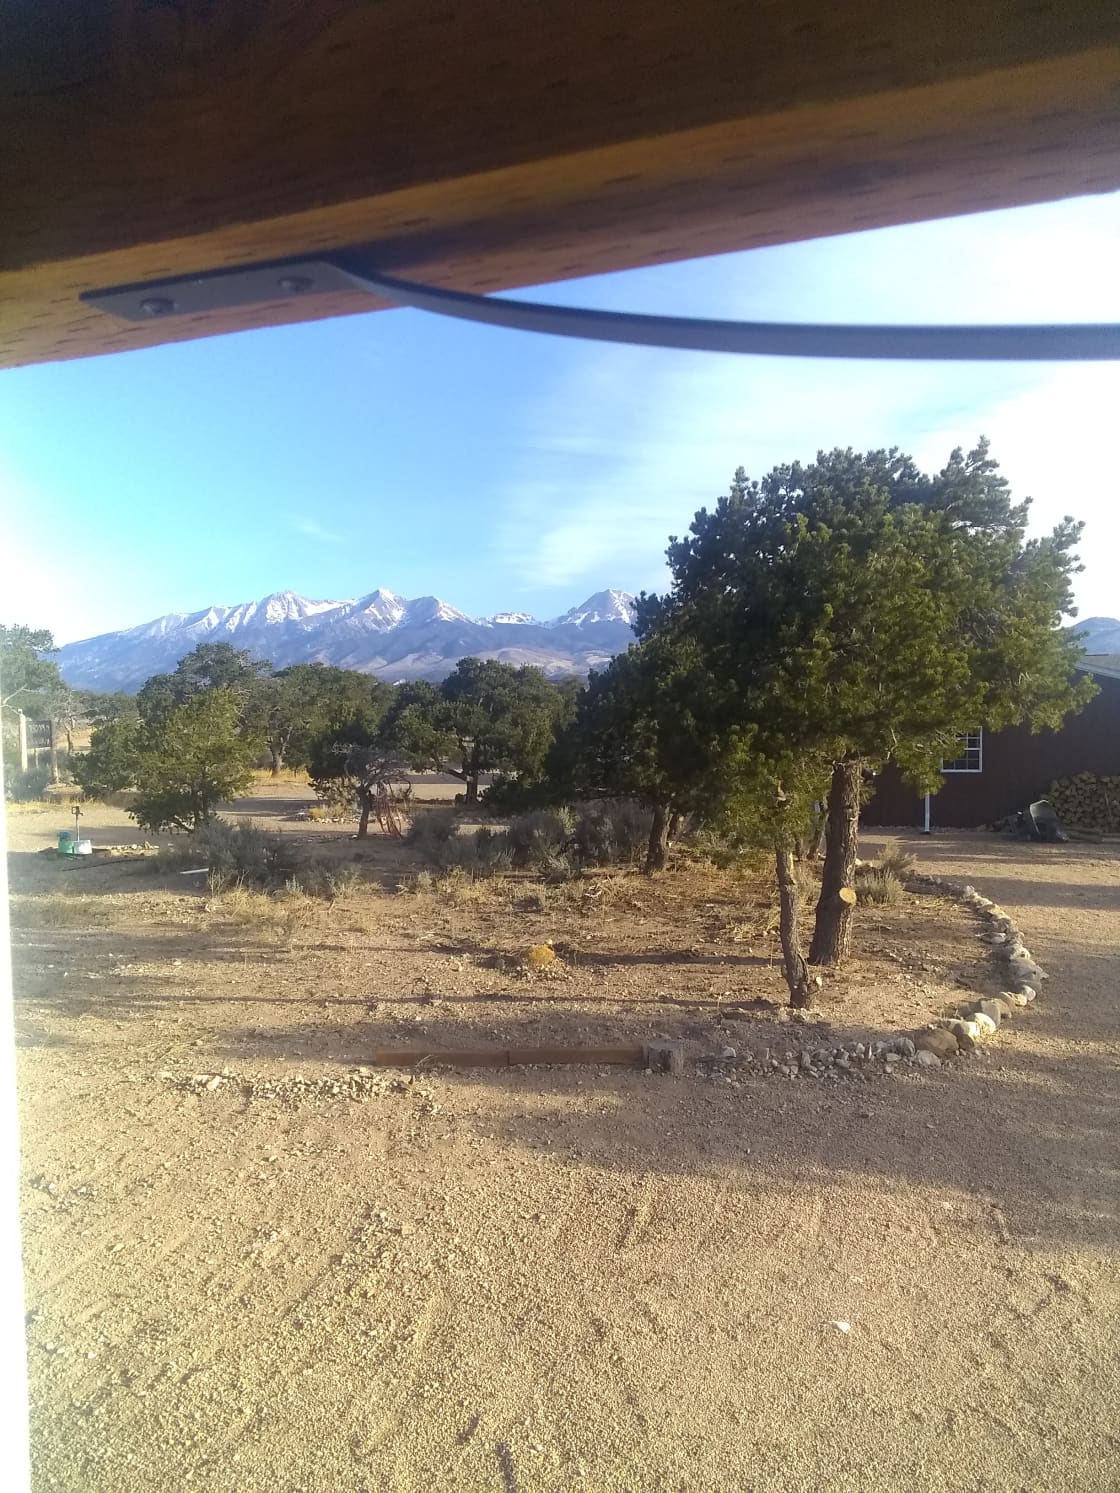 View looking north from Tiny house.